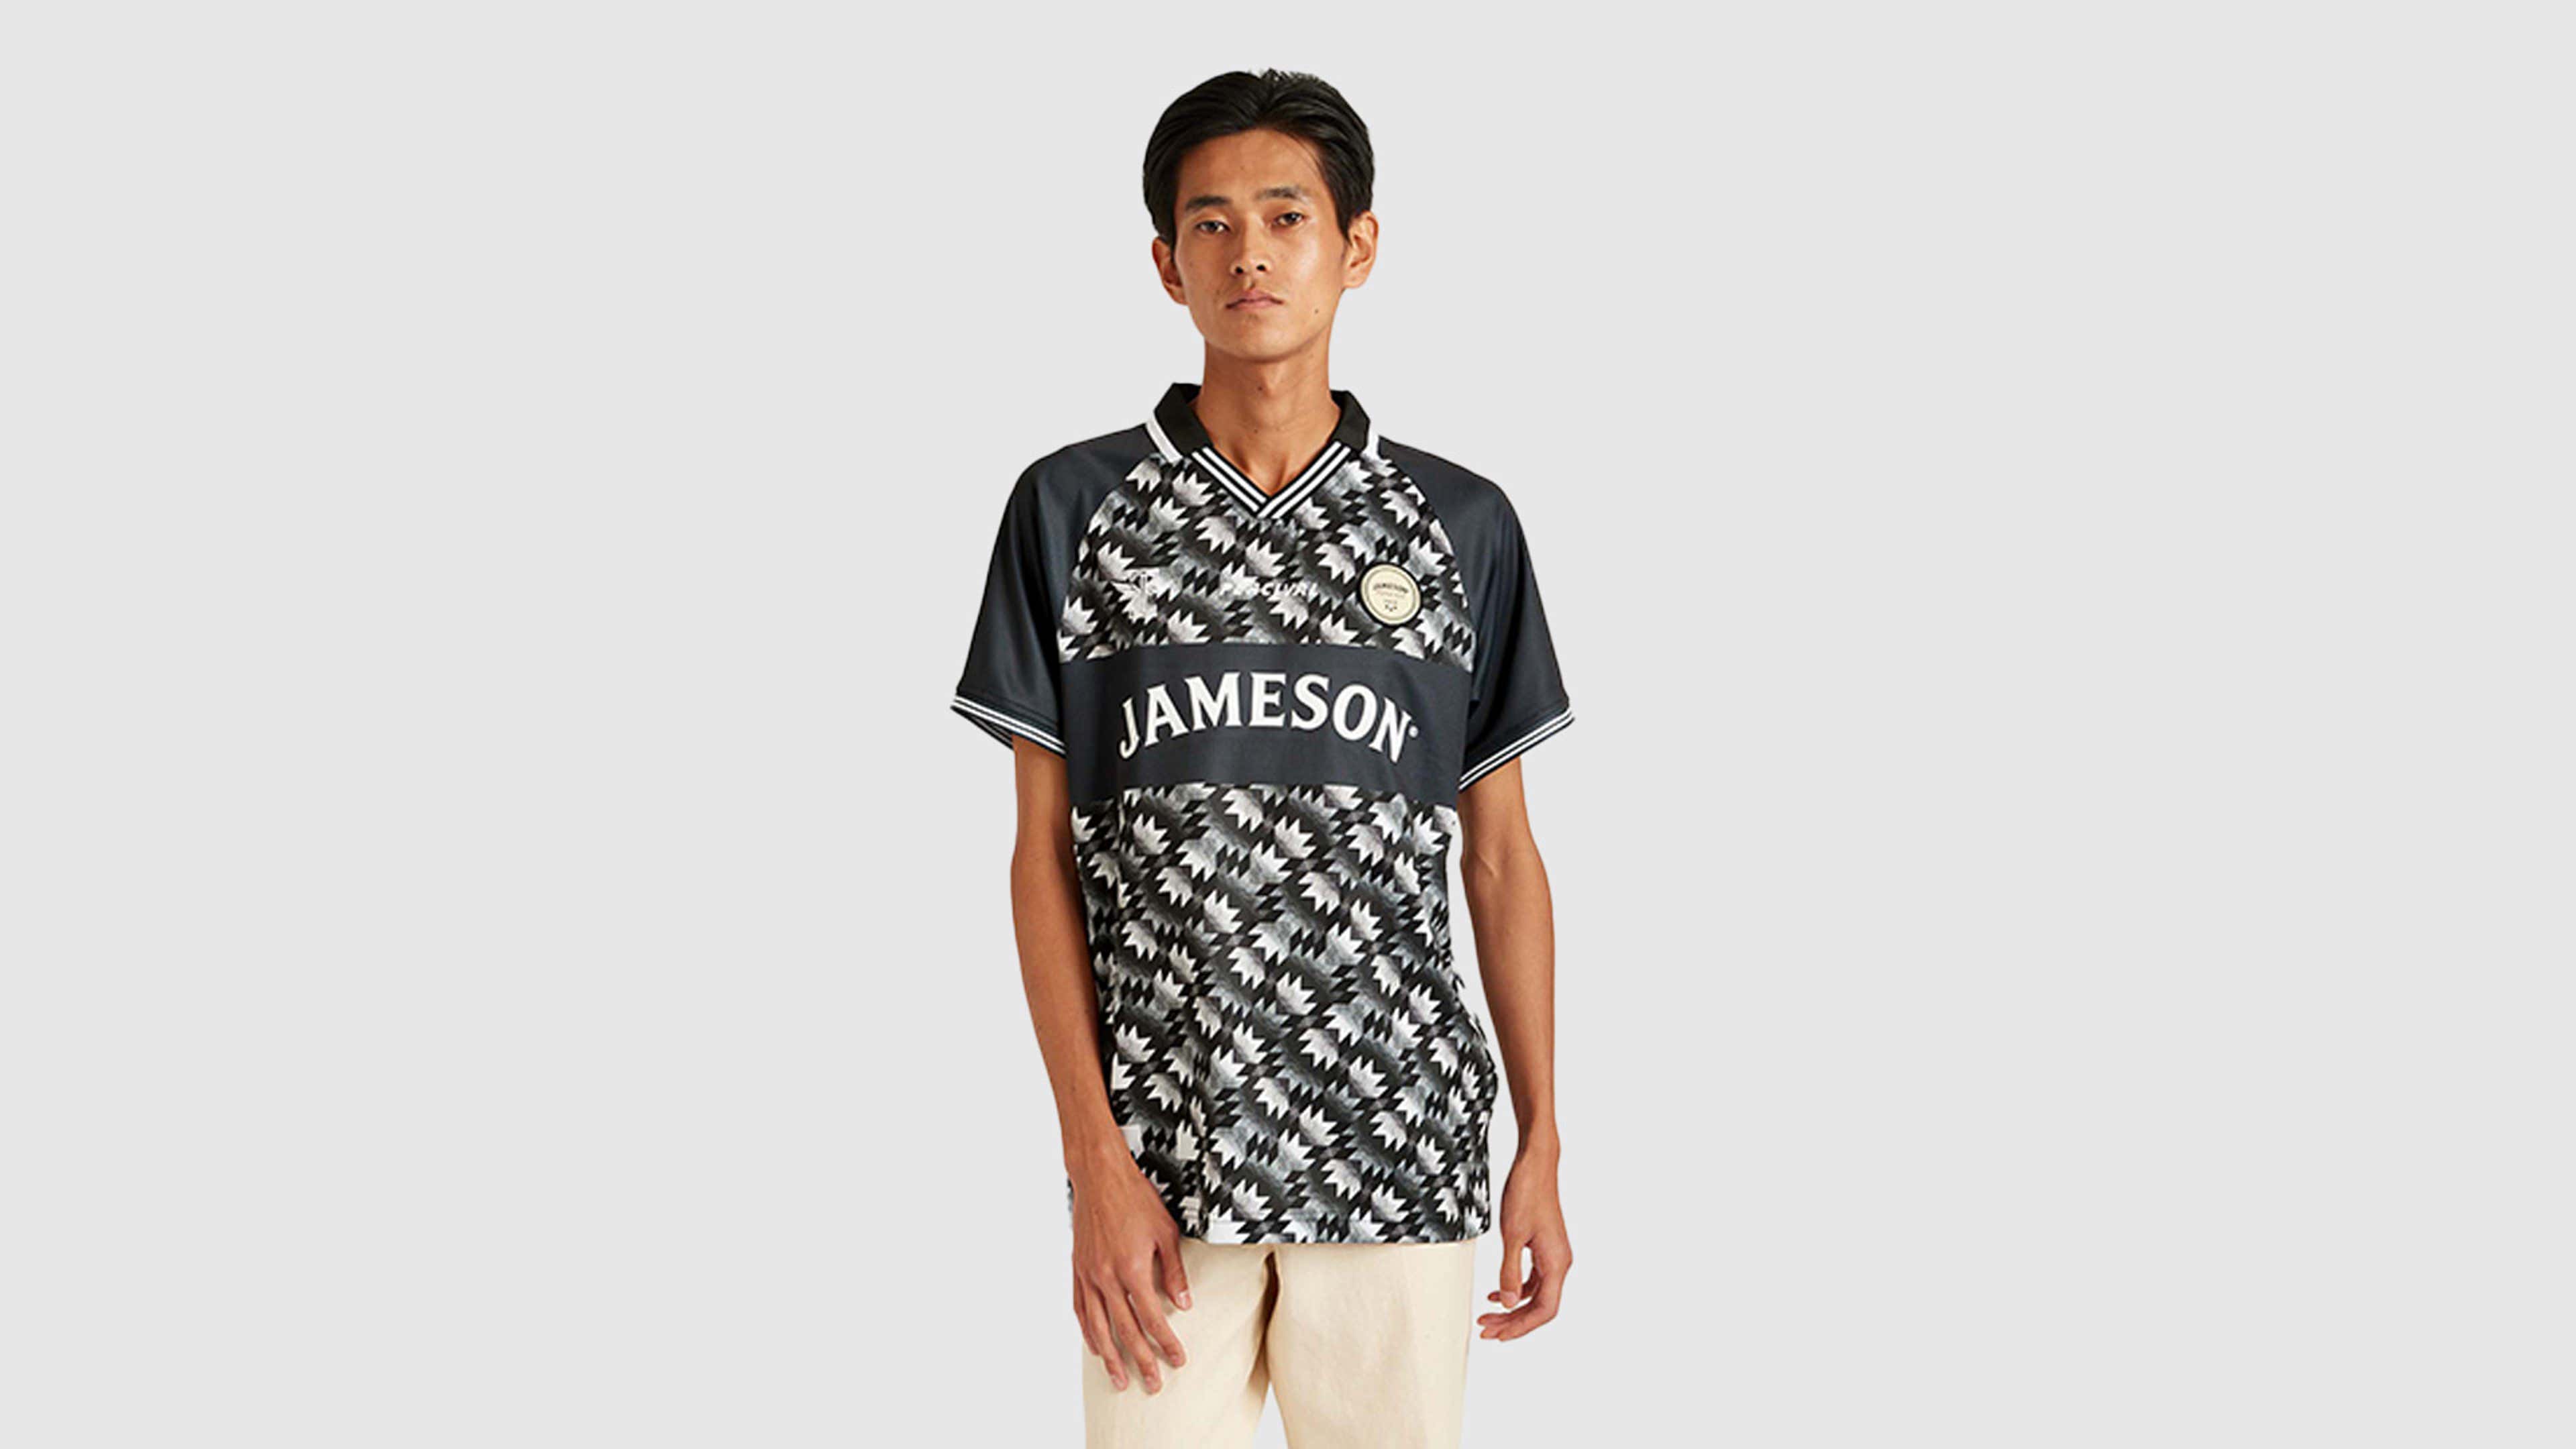 Jameson and Percival come together for a limited-edition capsule collection